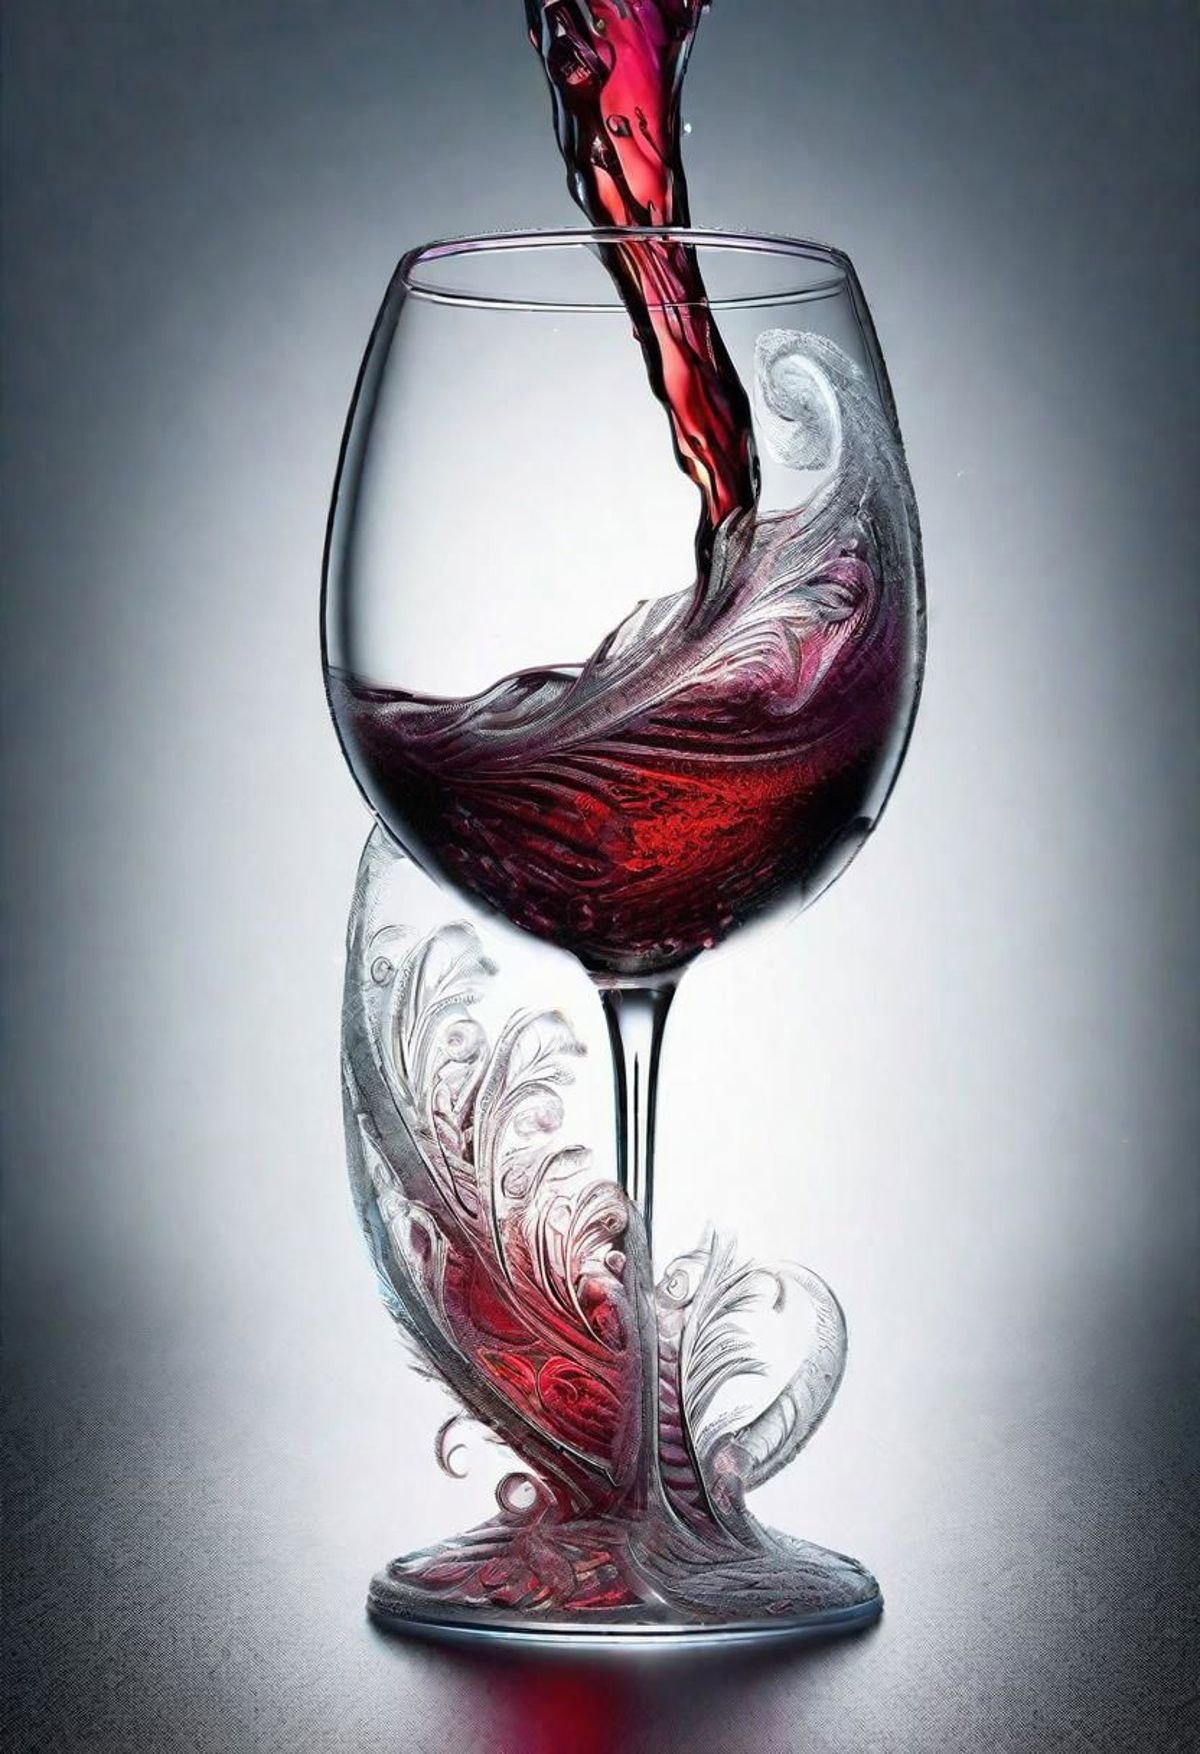 A wine glass with a red liquid in it and a leaf design on the stem.